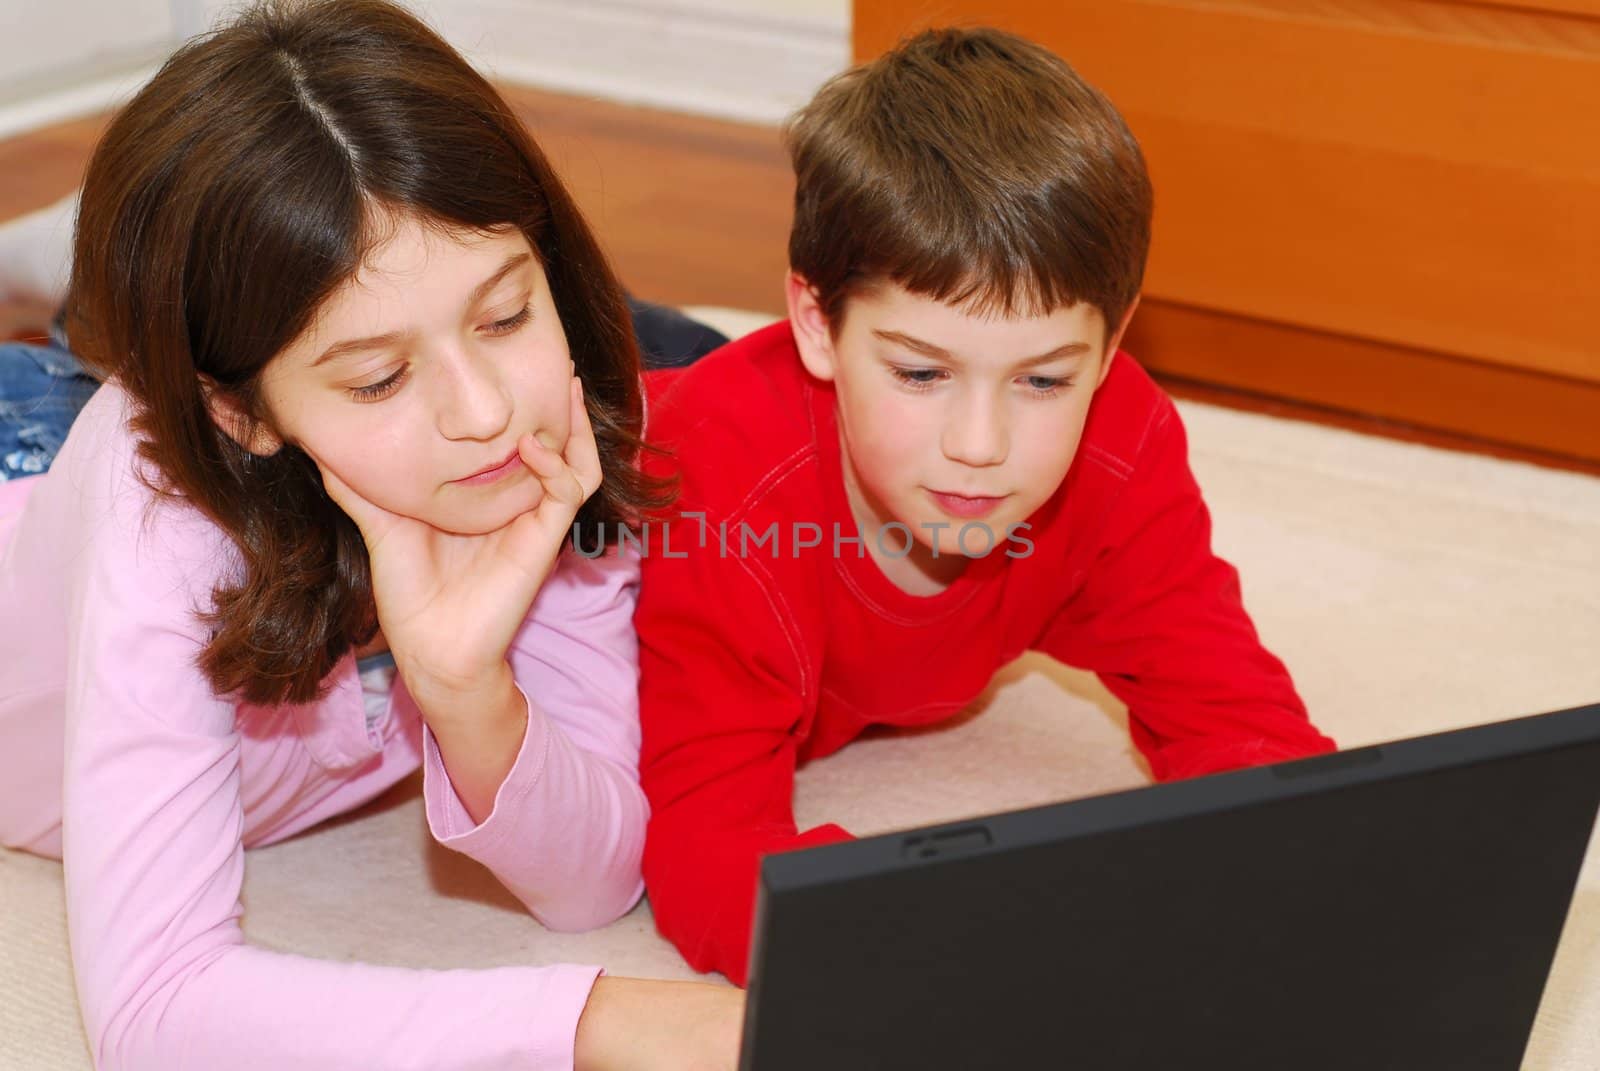 Children lying on the carpet with portable computer